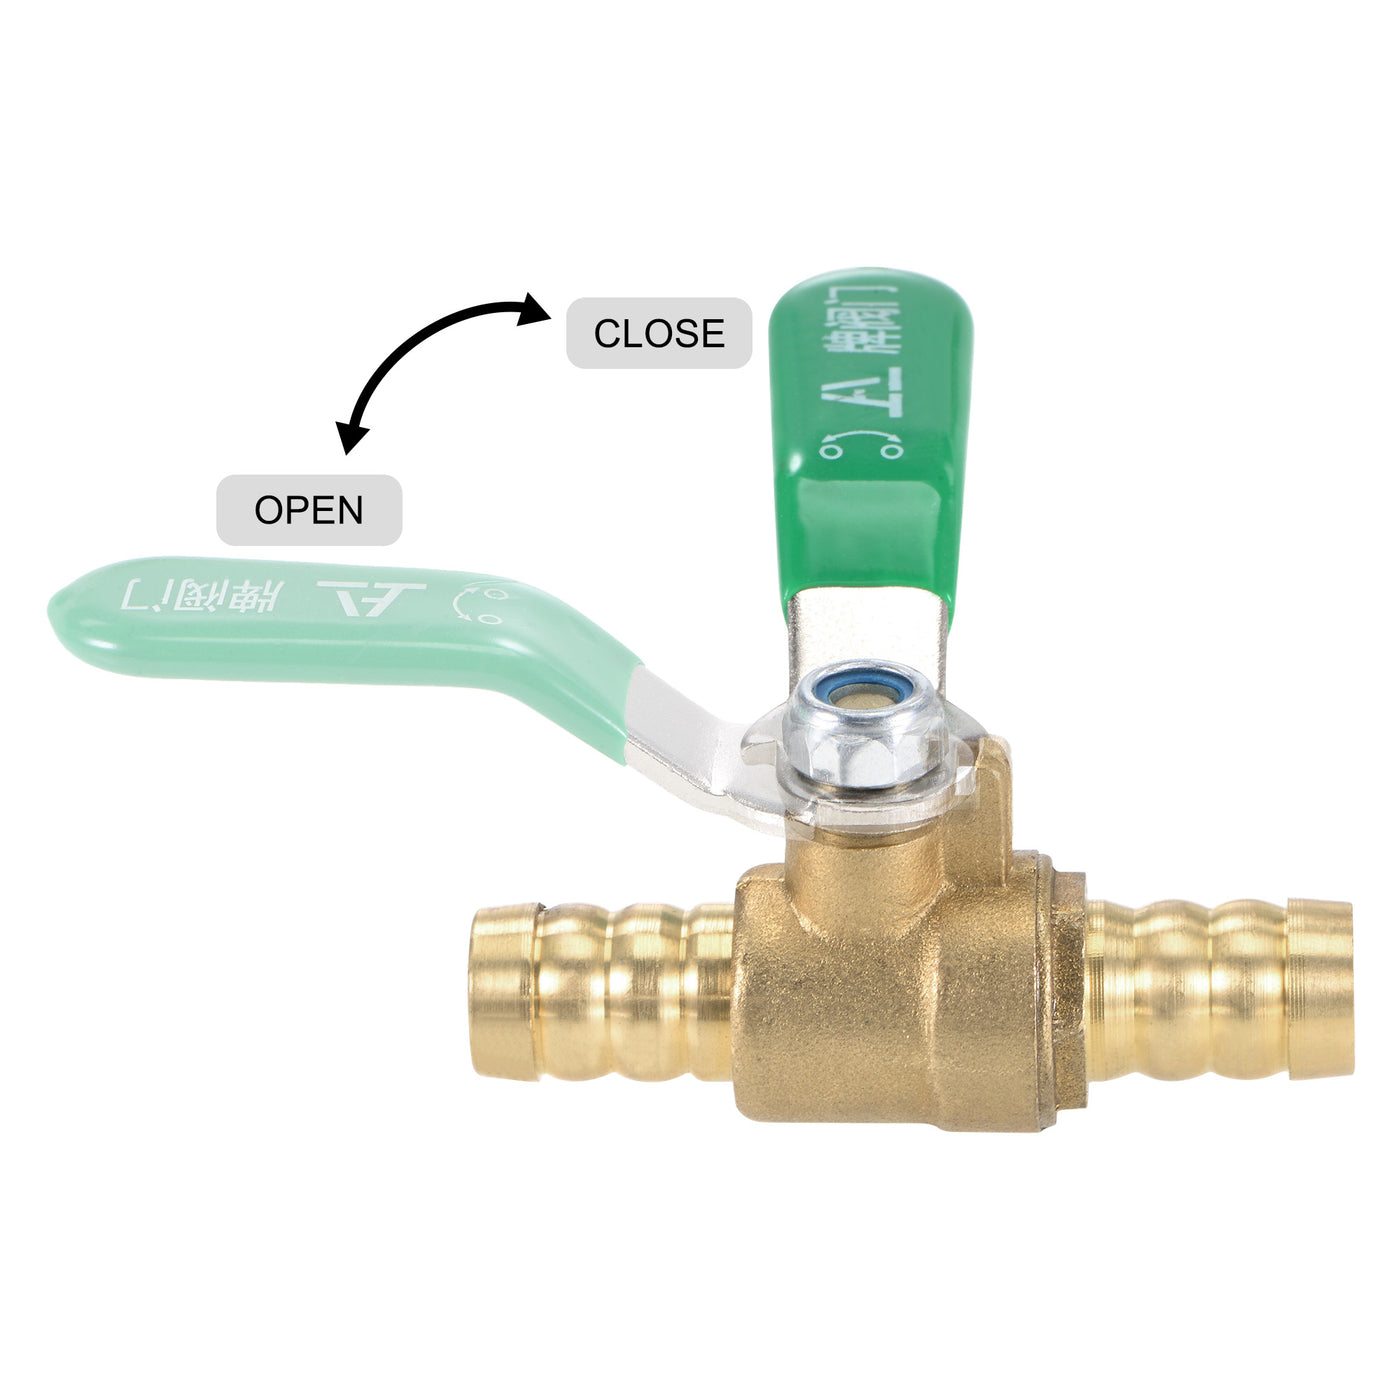 Uxcell Uxcell Brass Air Ball Valve Shut Off Switch 12mm Hose Barb to 12mm Hose Barb with Clamps Green Handle